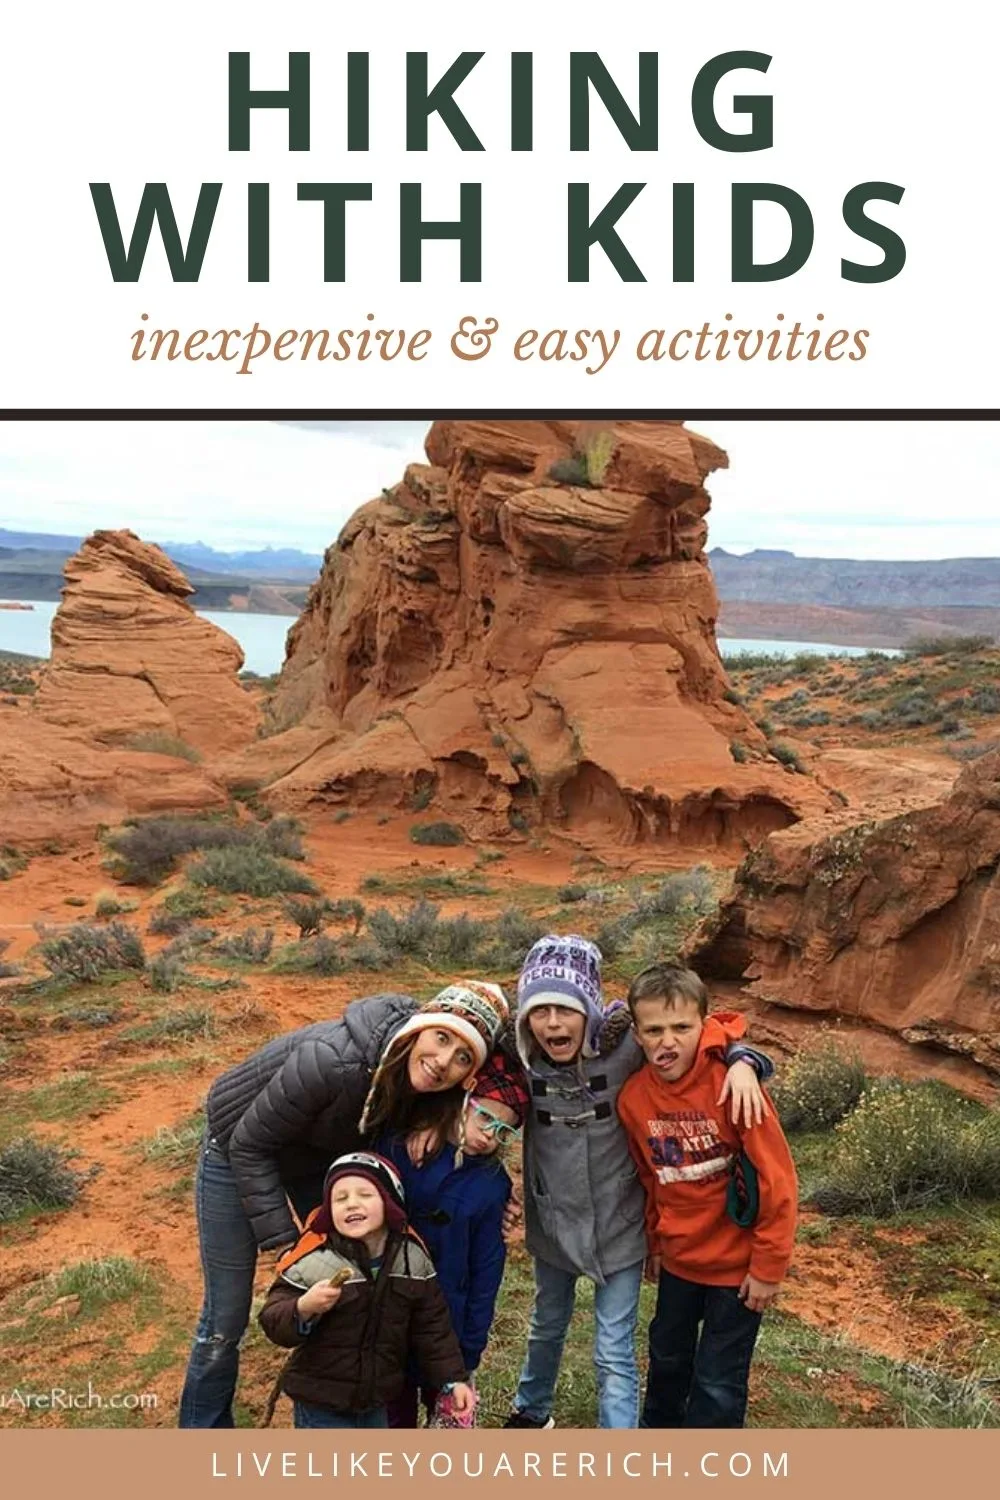 I am always looking for fun things/ activities to do with my kids to keep them active and happy without spending a fortune. I’ve found that hiking is an awesome way to do that! Here are 12 great tips for hiking with kids shared by my friend, an avid hiker.